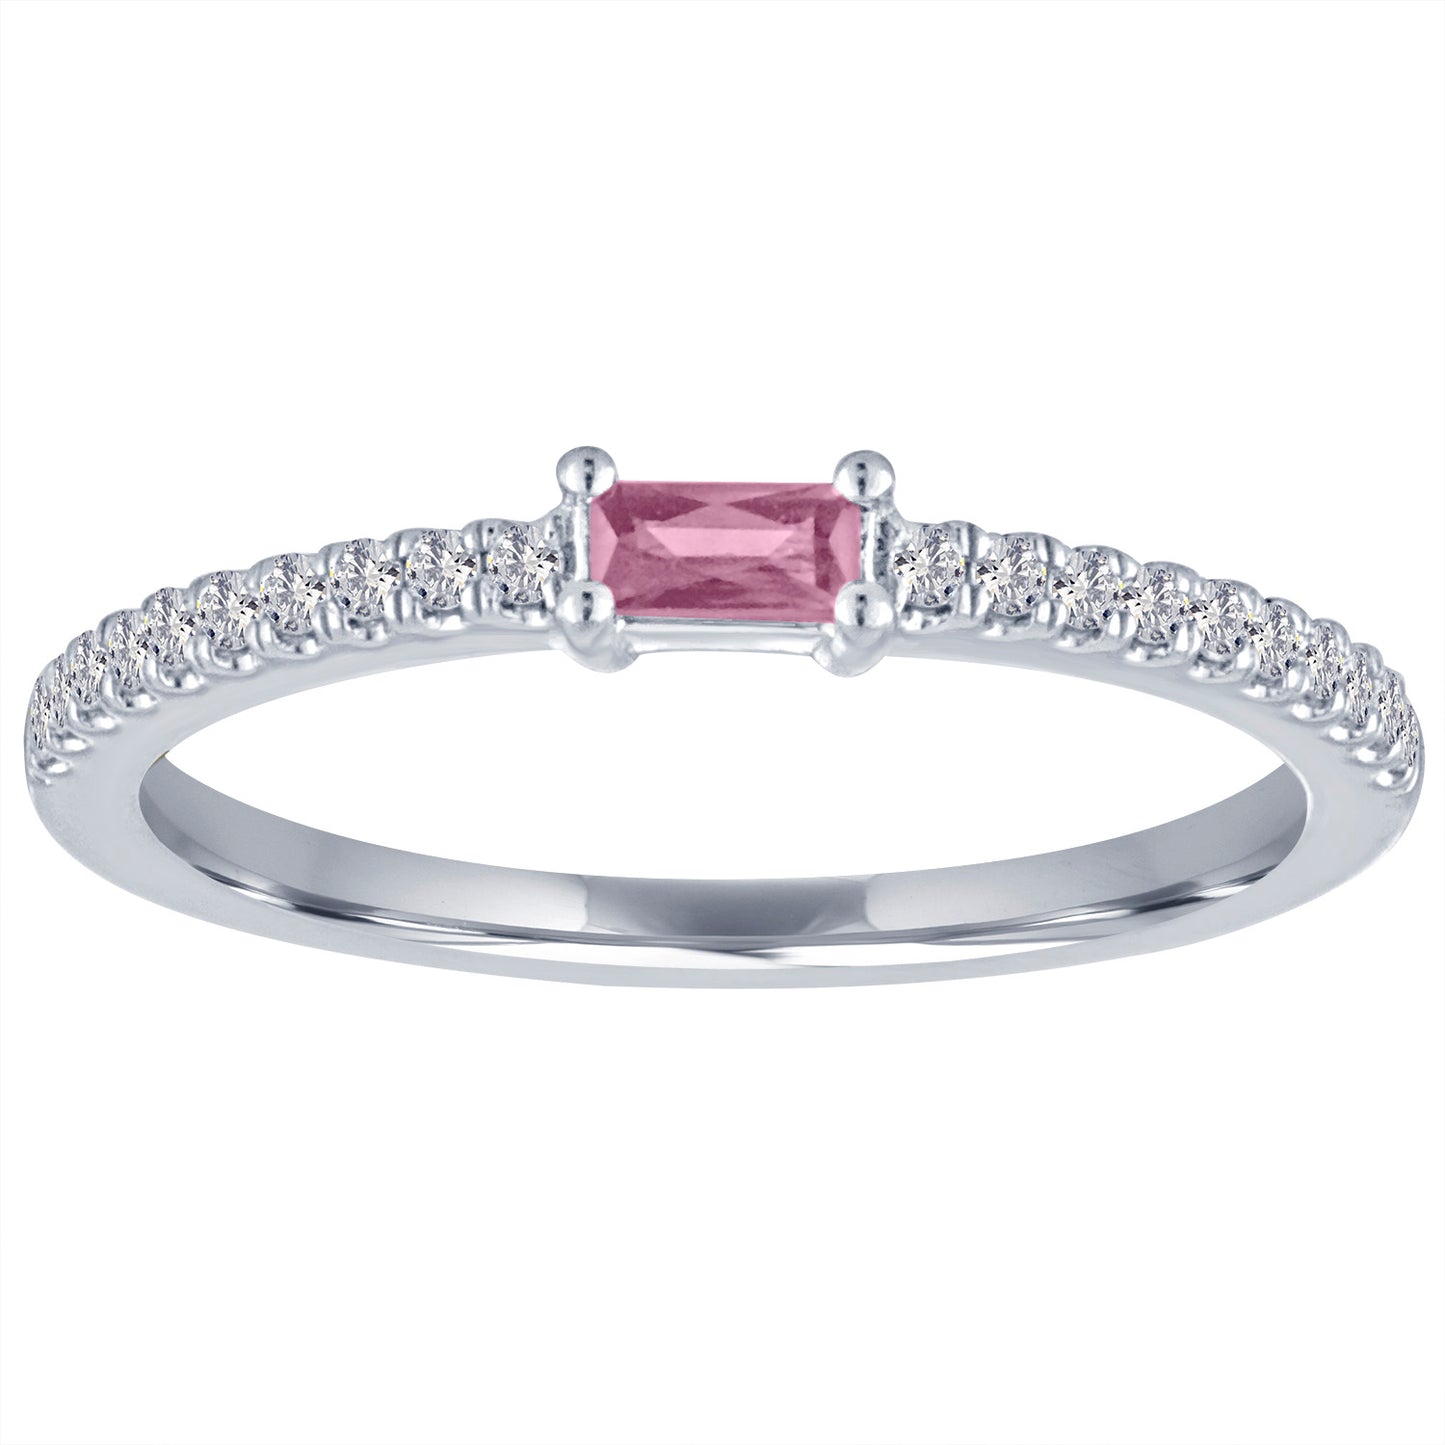 White gold skinny band with a pink tourmaline baguette in the center and round diamonds on the shank.